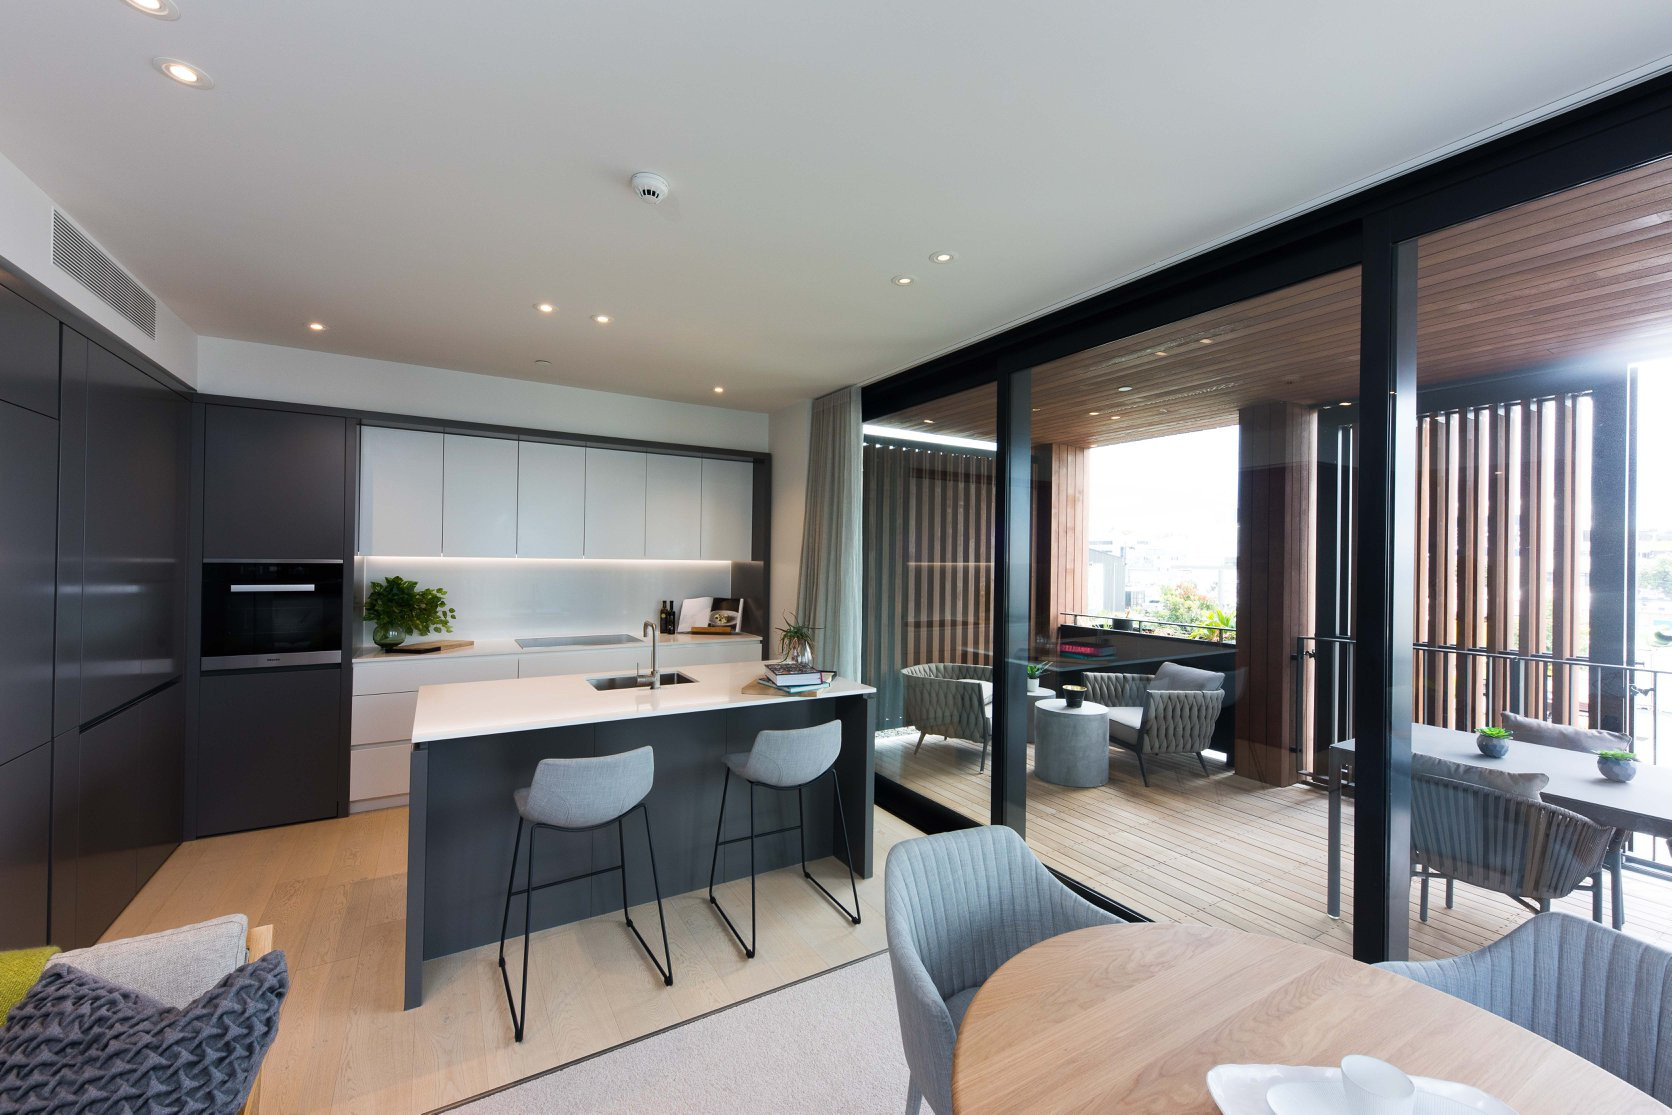 modern black and white kitchen, with large windows showcasing wooden exterior and deck area